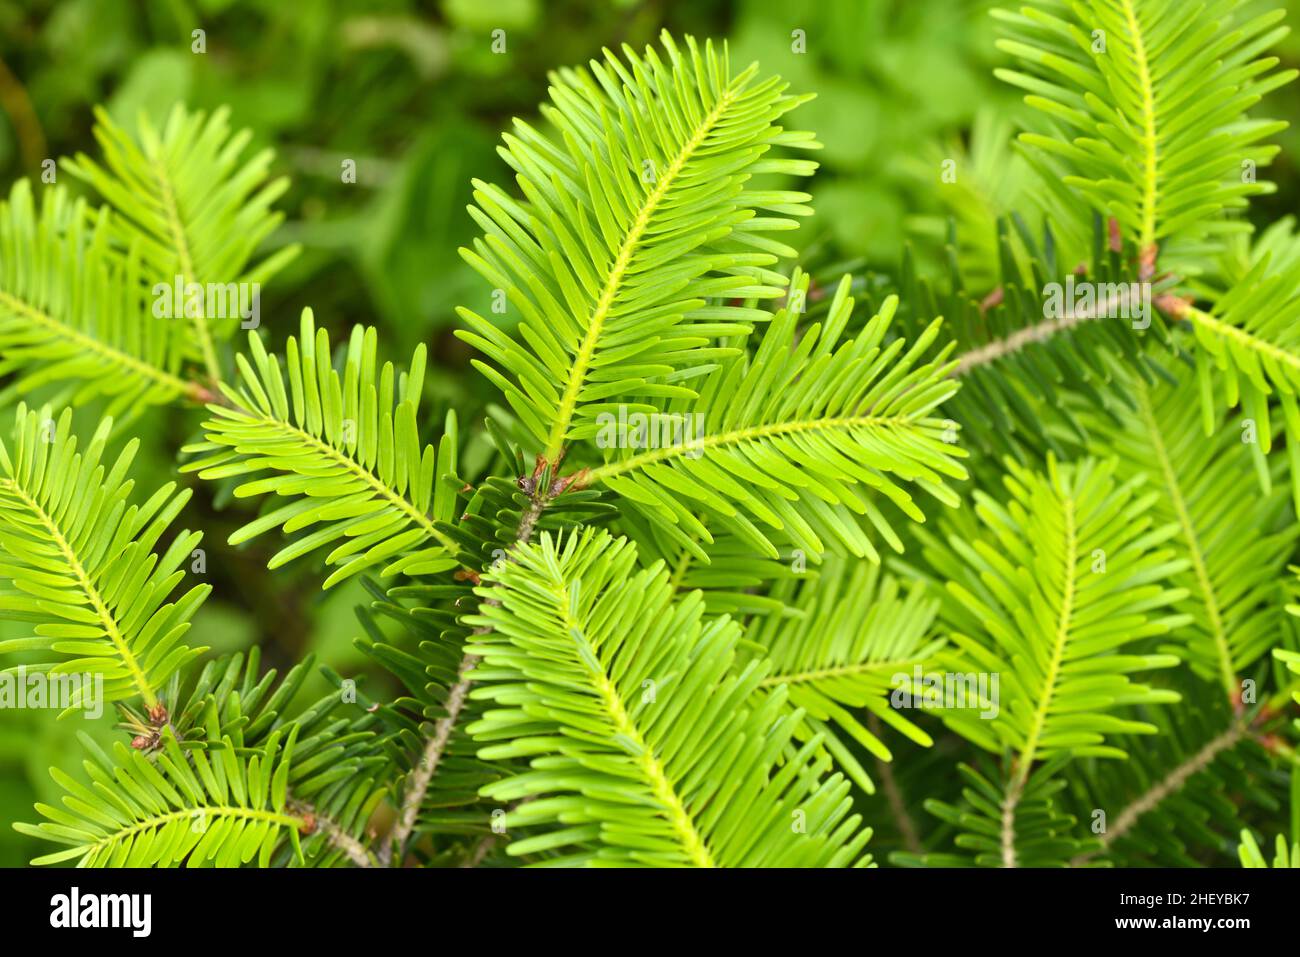 Closeup of a young fresh twig of a silver fir (Abies alba). Natural background Stock Photo